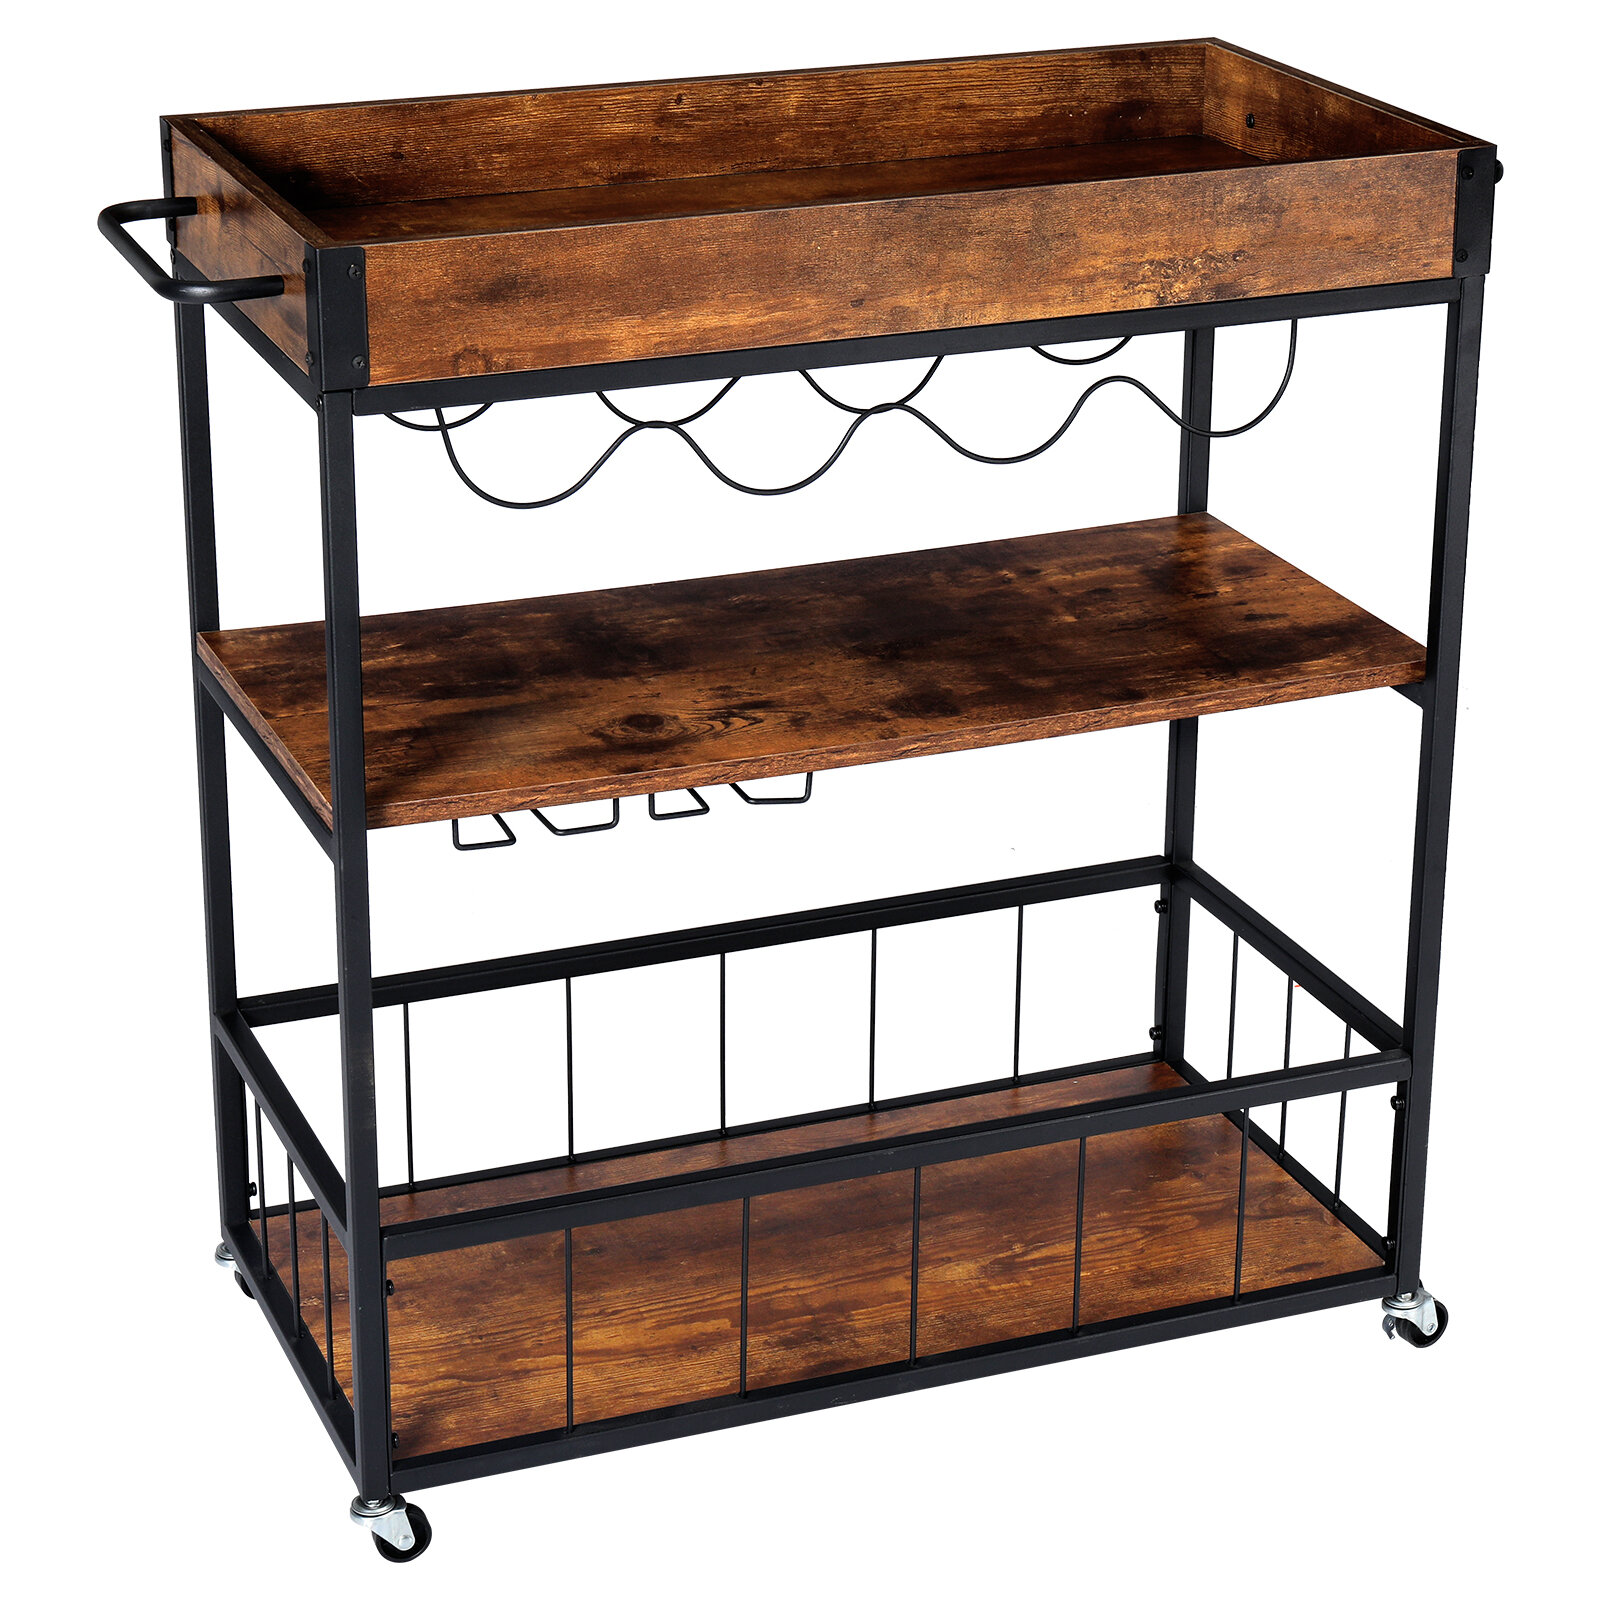 Dinaza 3-Tier Bar Carts Kitchen Serving Utility Cart on Wheels with Storage for Outdoor Kitchen Club Living RoomWood F